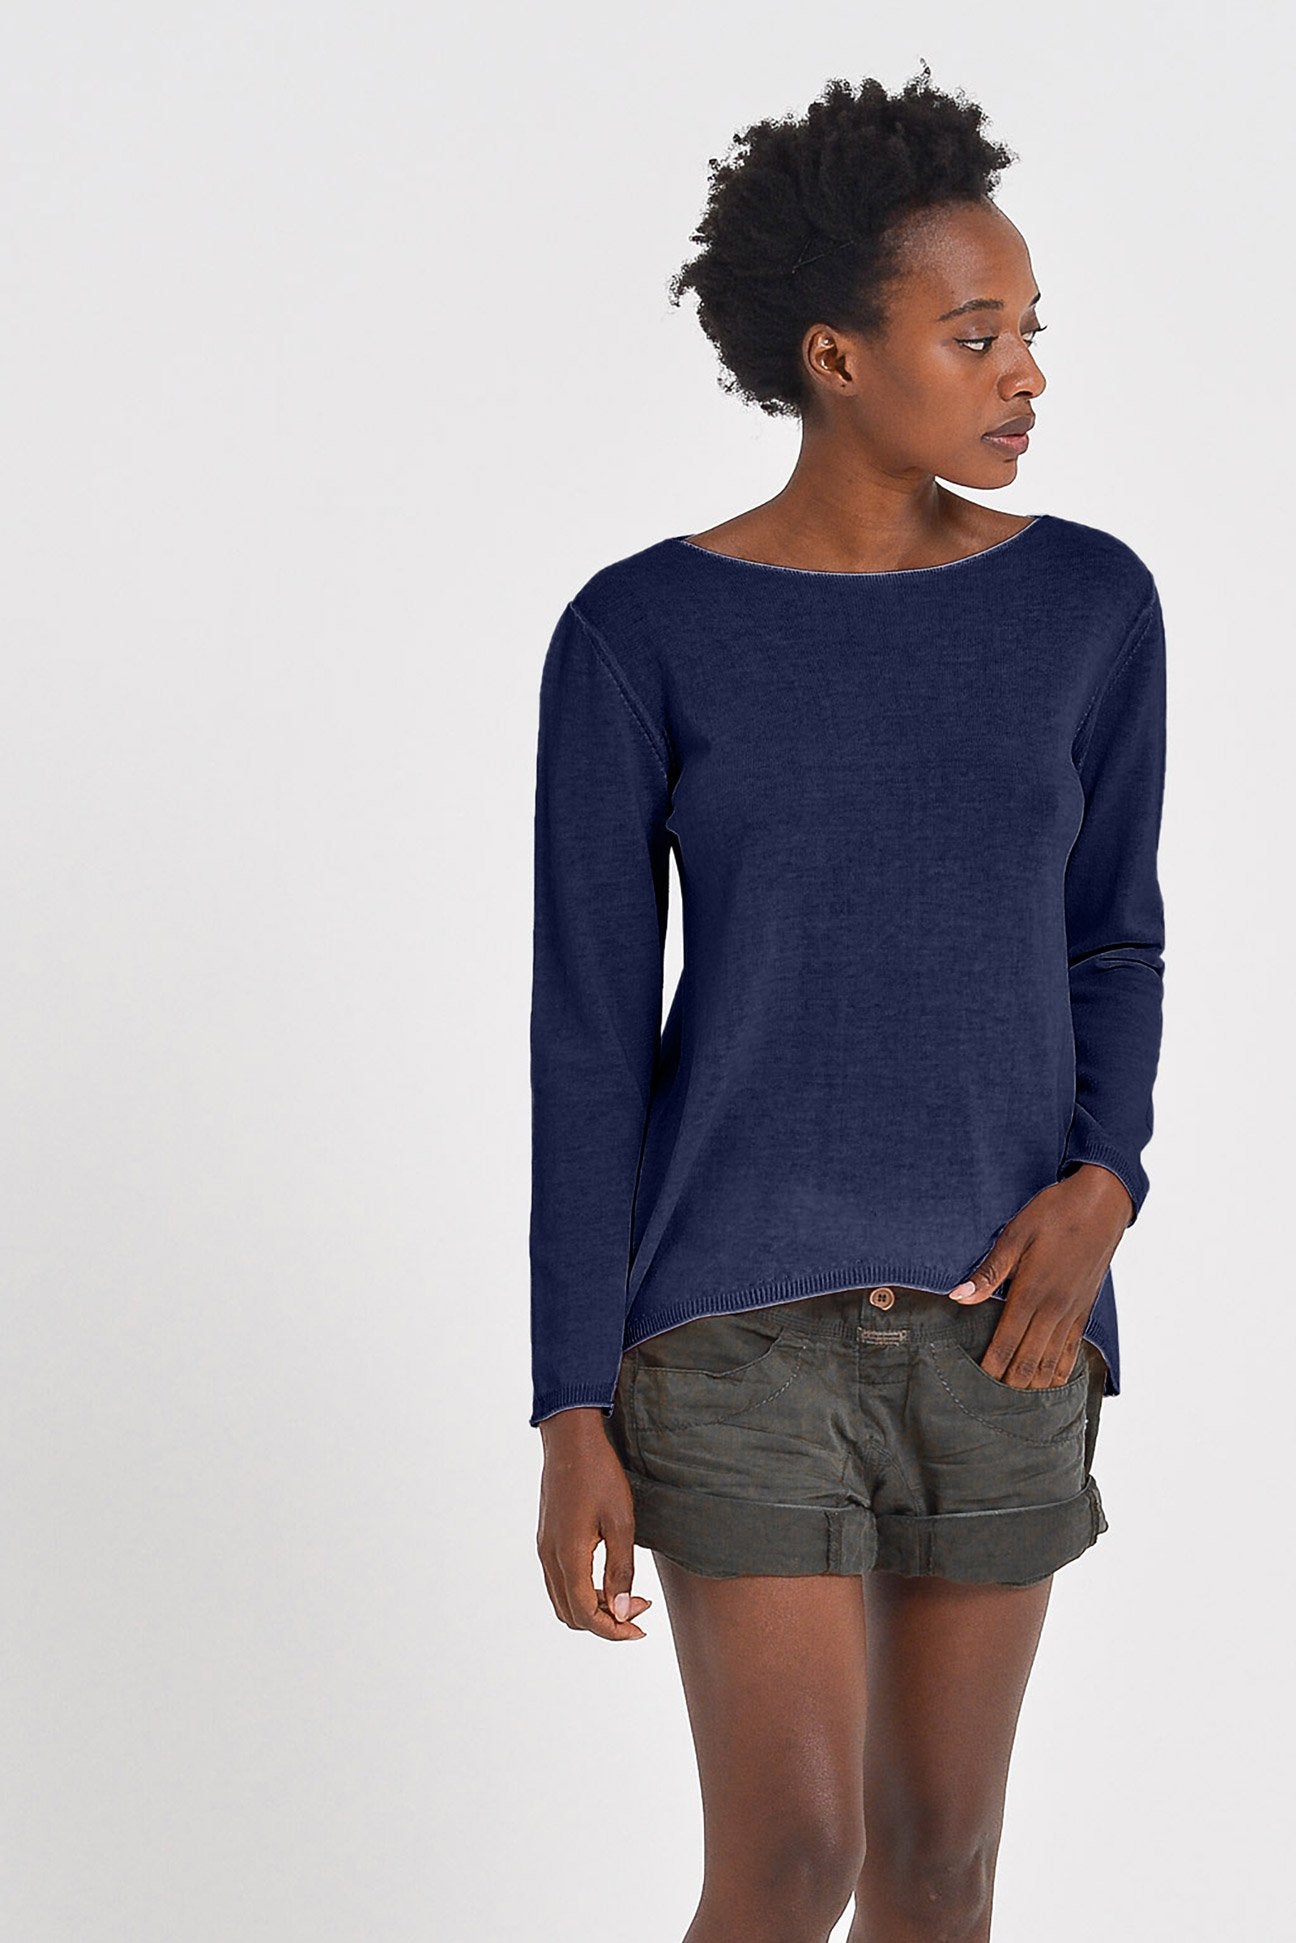 Boat Neck Cotton Sweater - Navy - Sweaters